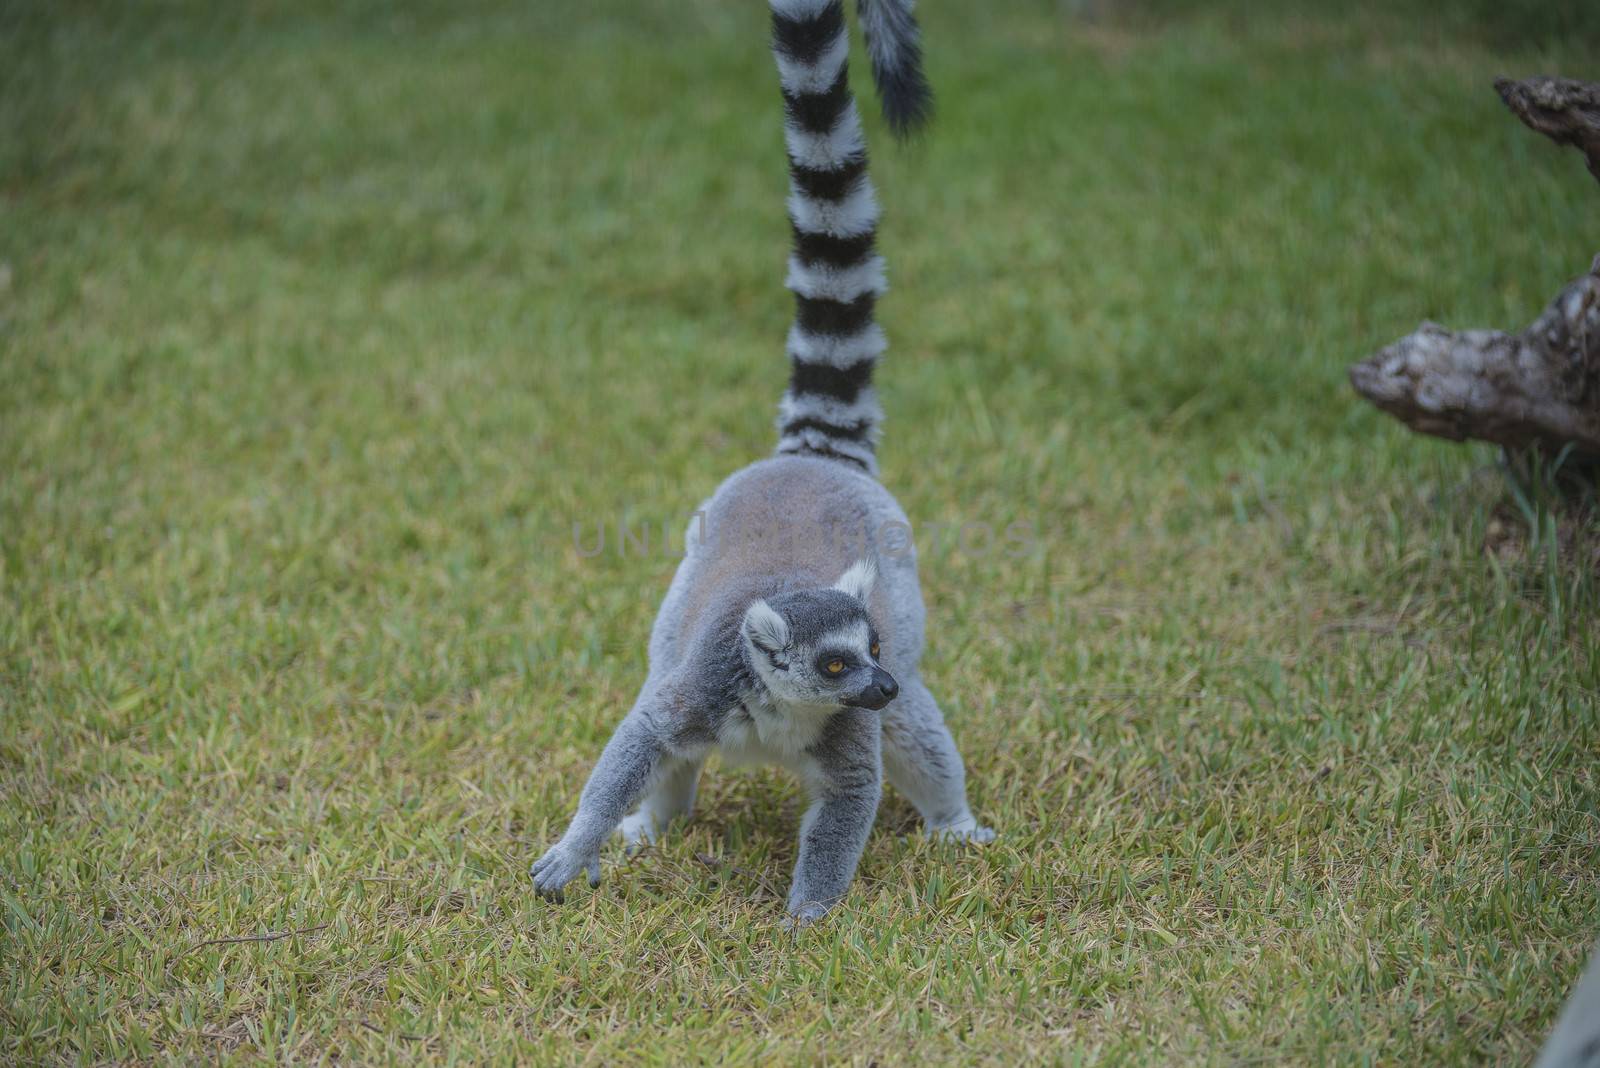 Ring-tailed lemur (Lemur catta), also called "cat", is half ape / primatart of lemur family and is widespread south and southwest in Madagascar. Photo is shot 27/07/2013.